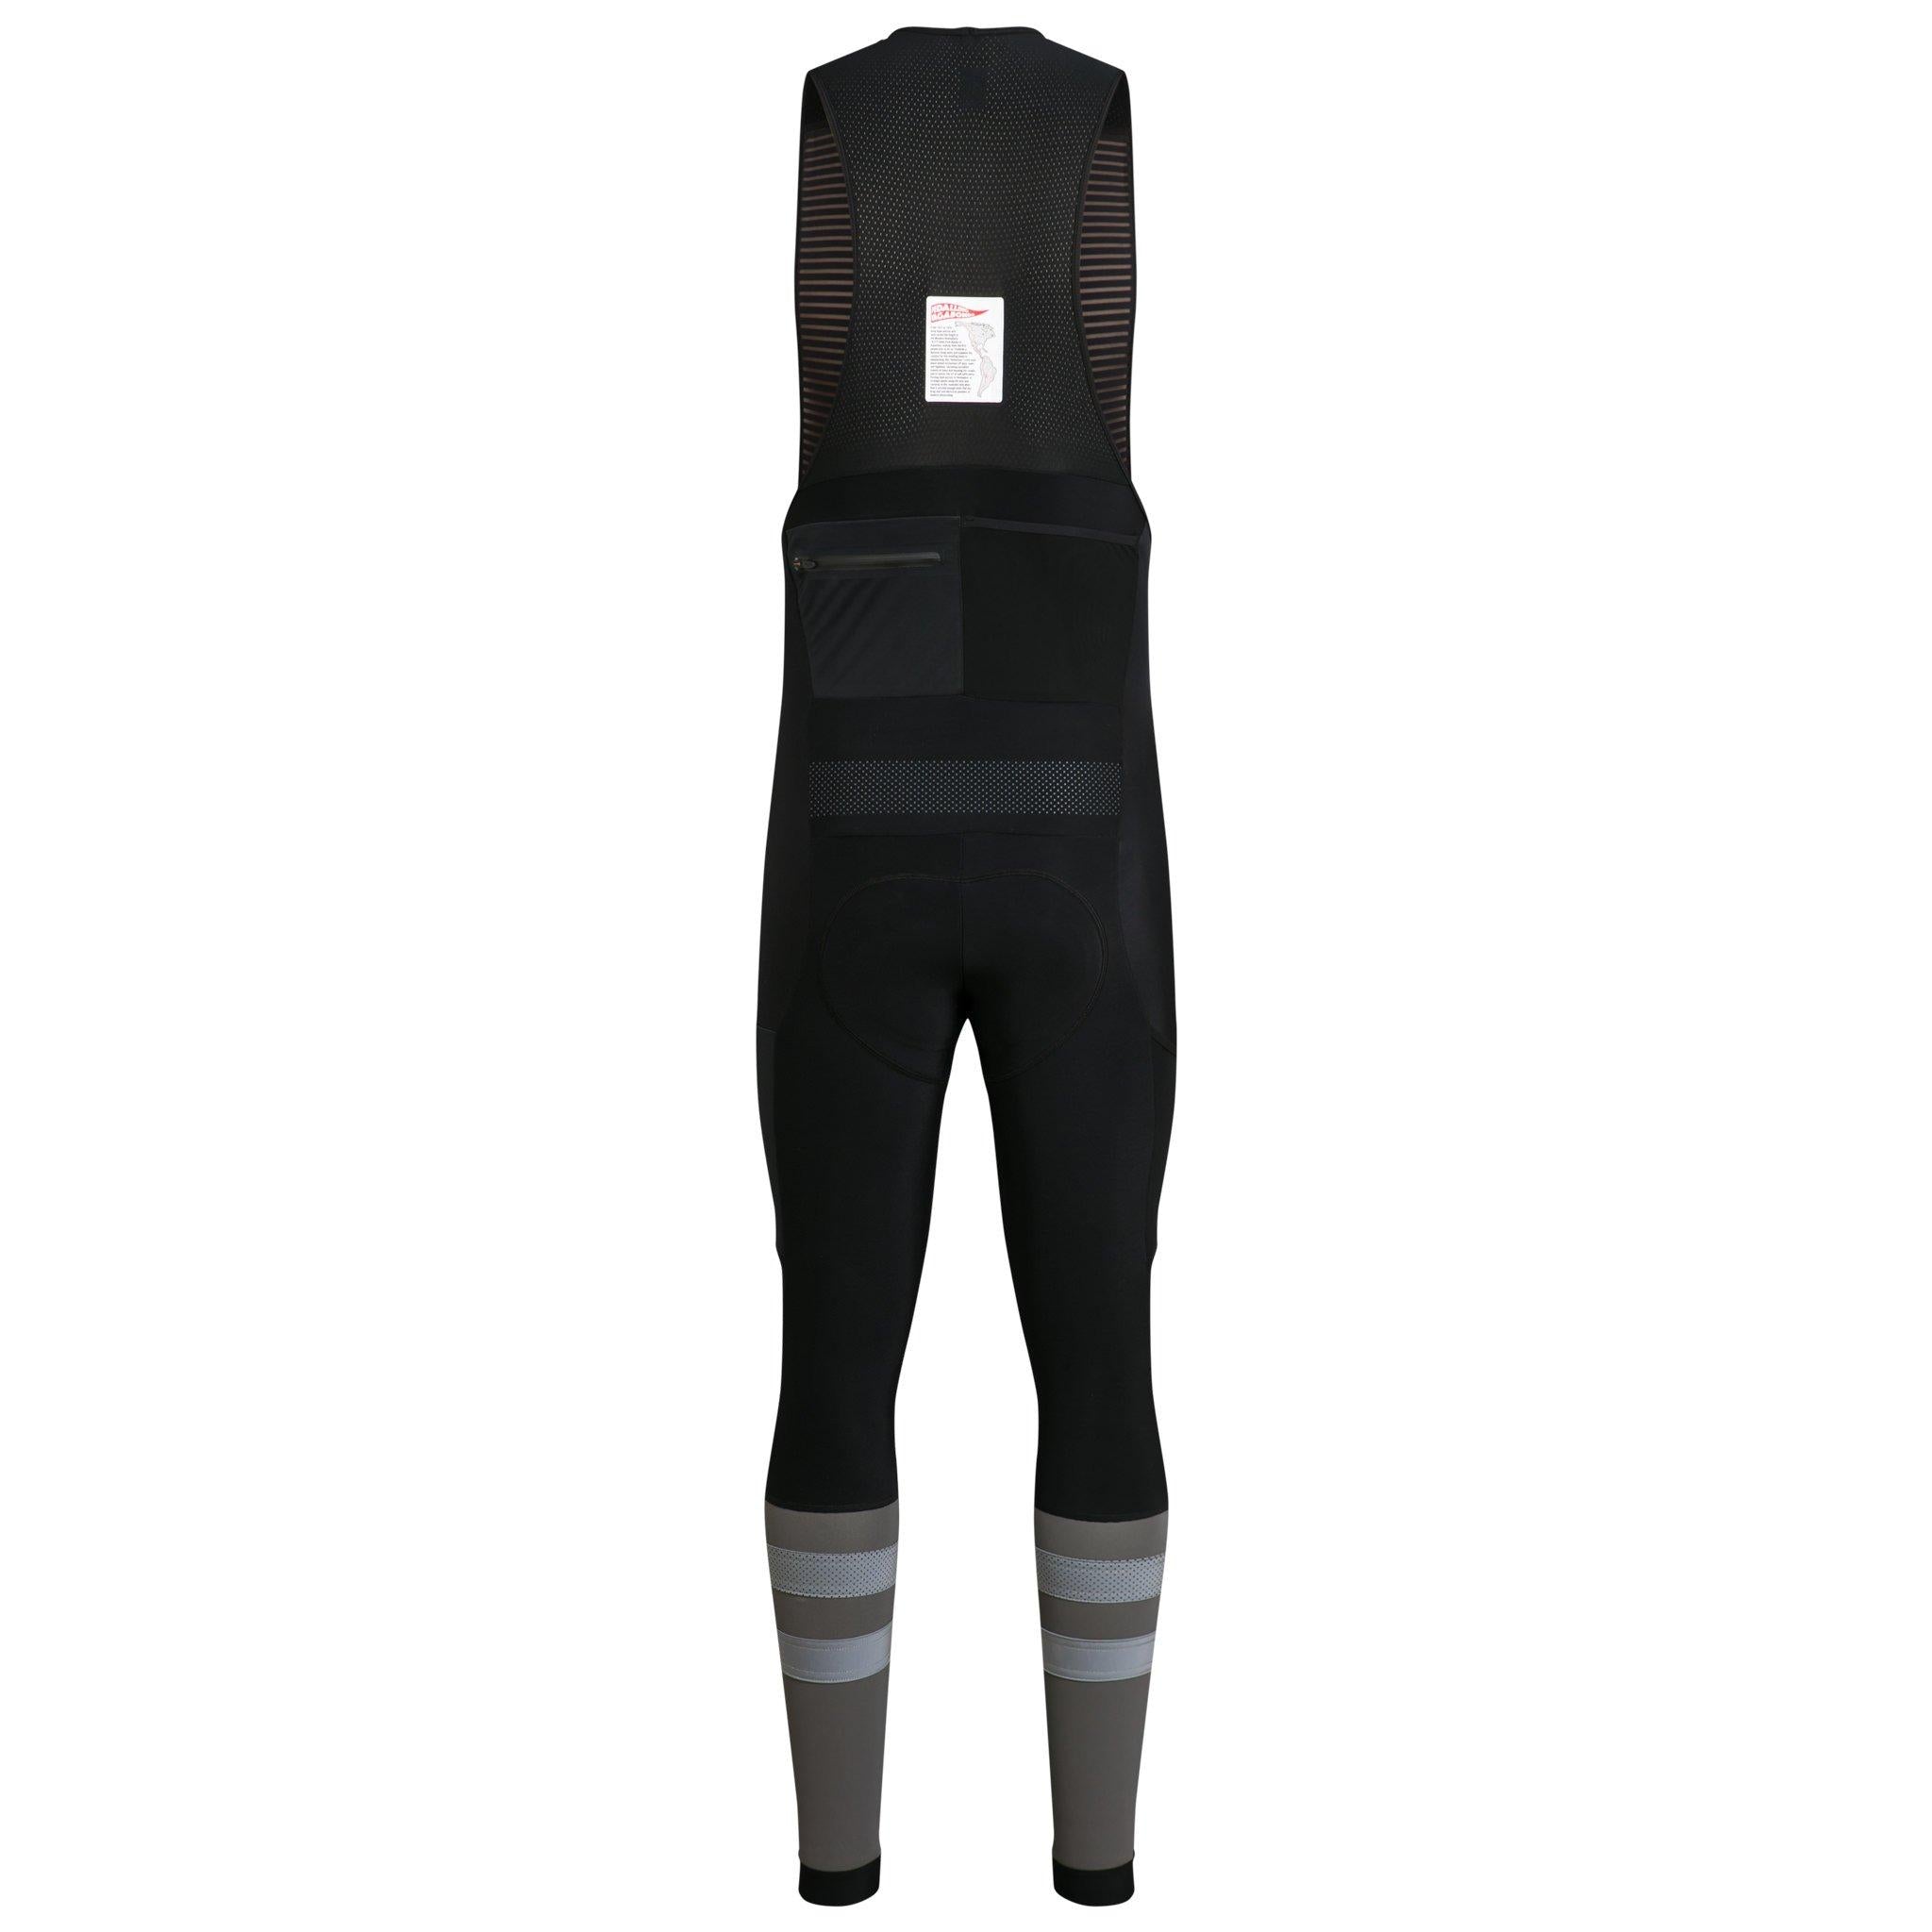 RAPHA Core Cargo Winter Tights with Pad AW23 - SNV Dark Navy/Navy